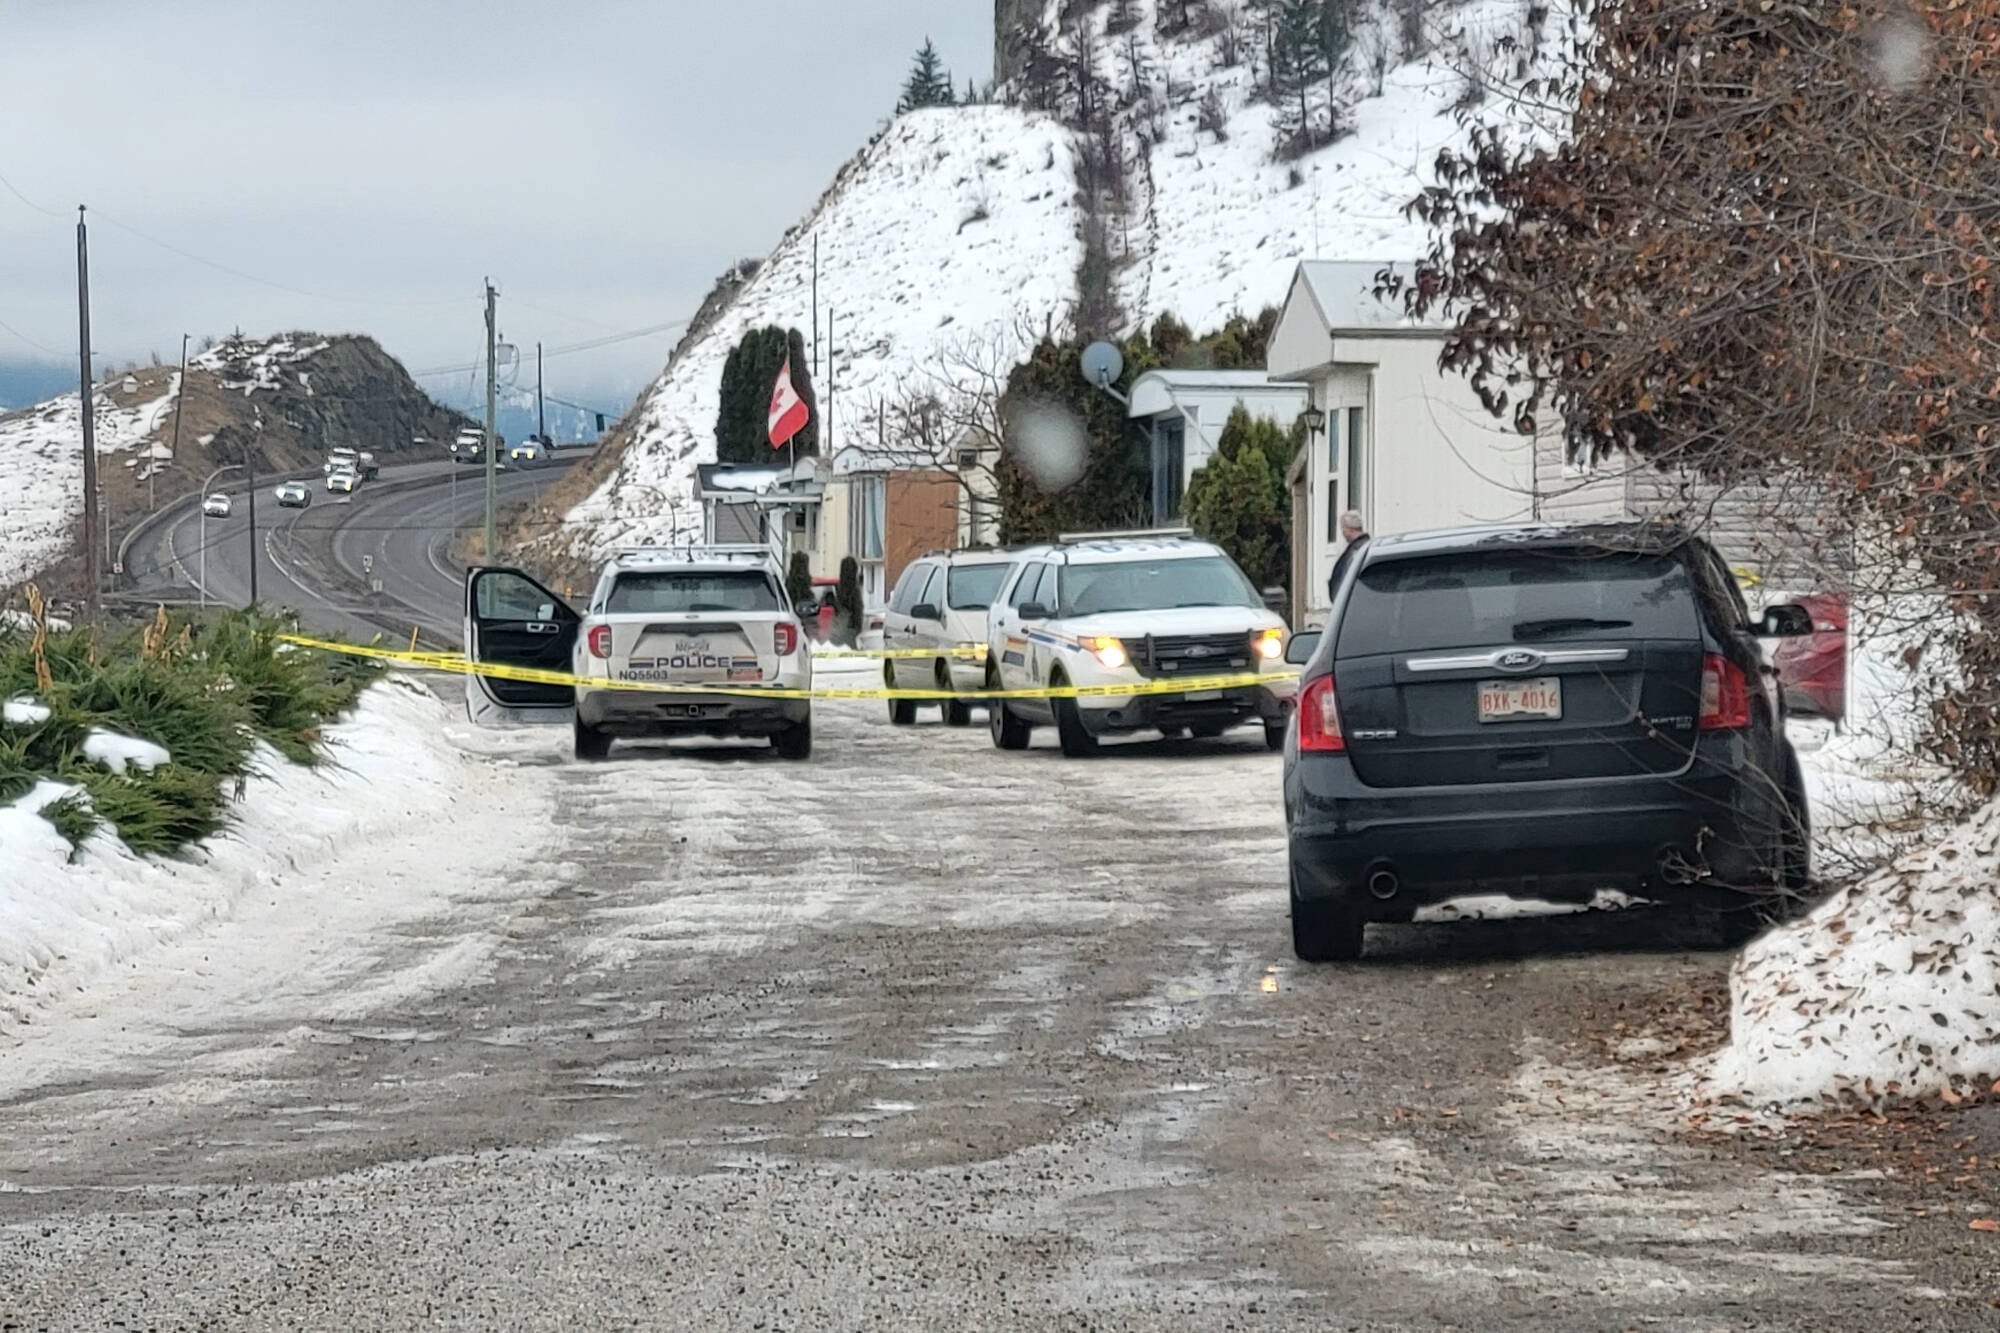 Police are investigating after two bodies were found inside a home on Clerke Road in Coldstream early Tuesday, Jan. 17. (Roger Knox - Morning Star)